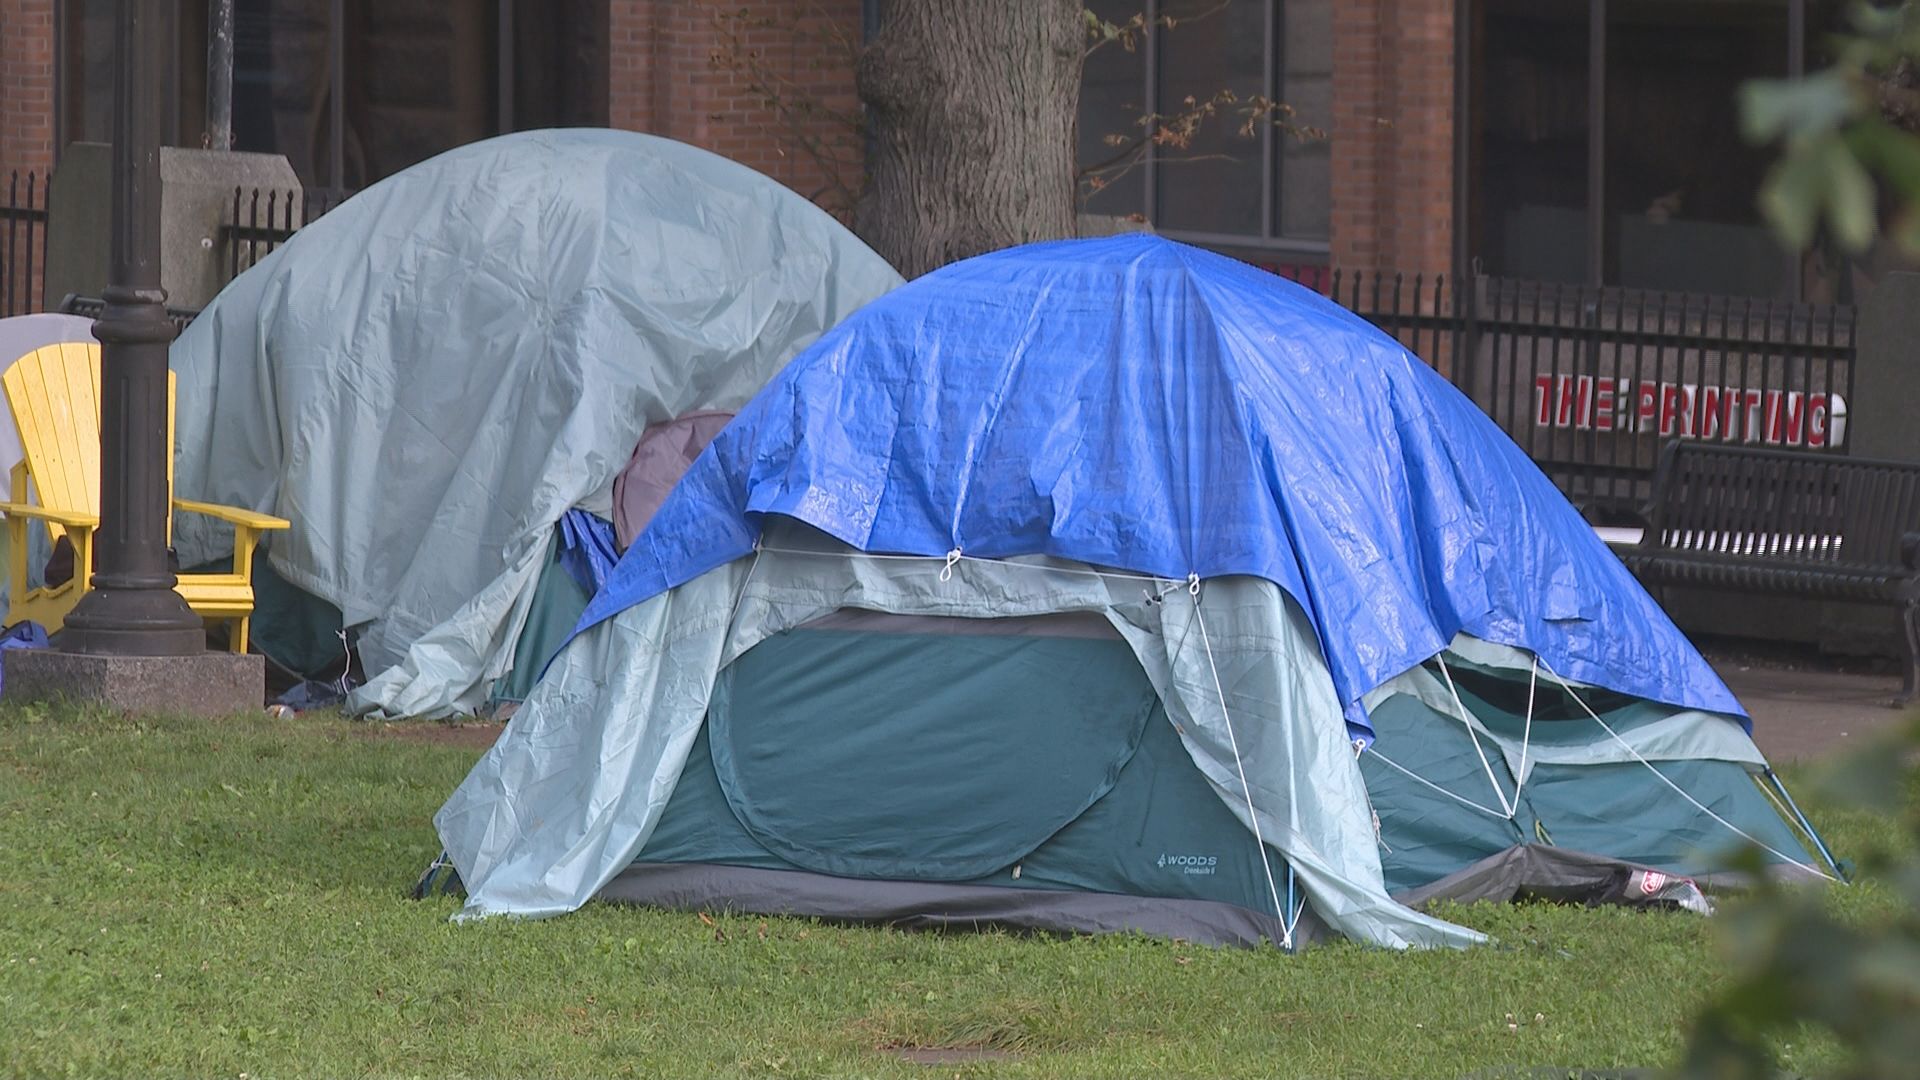 The need for safety and ‘survival’ for those living in Halifax tent encampments